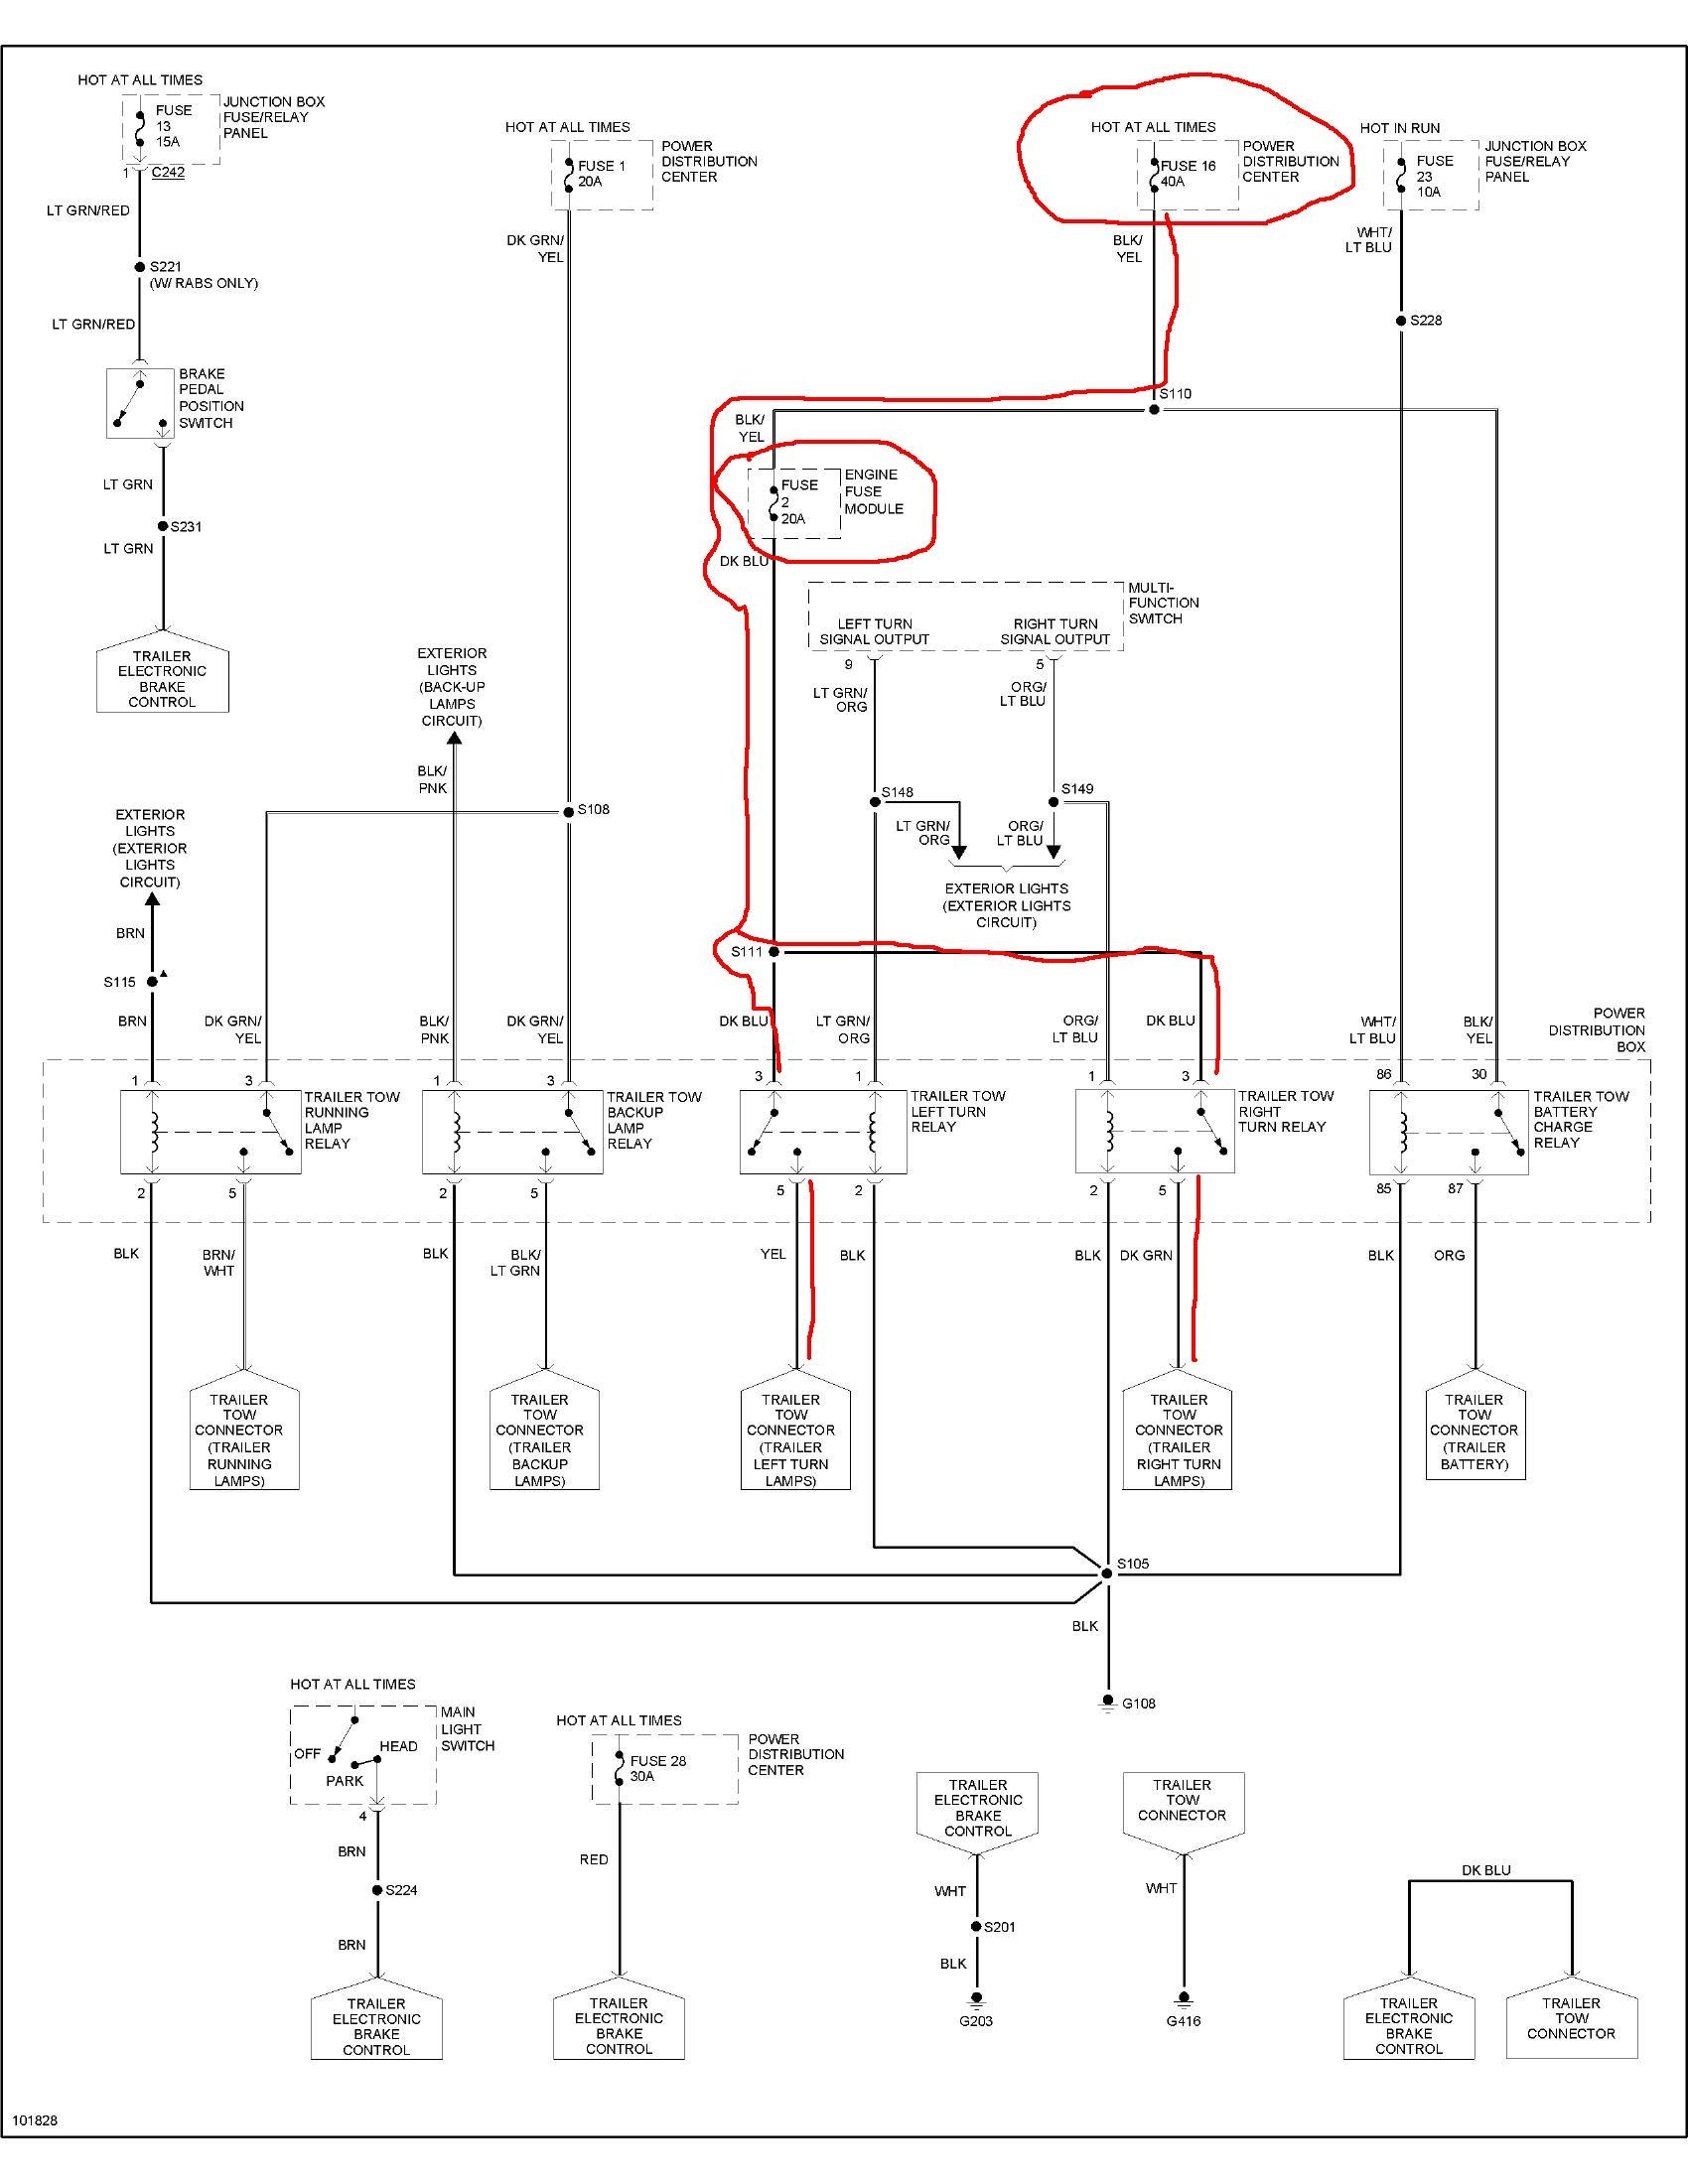 55 2018 F150 7 Pin Wiring Diagram - Wiring Diagram Harness 2018 Ford F150 7 Pin Trailer Wiring